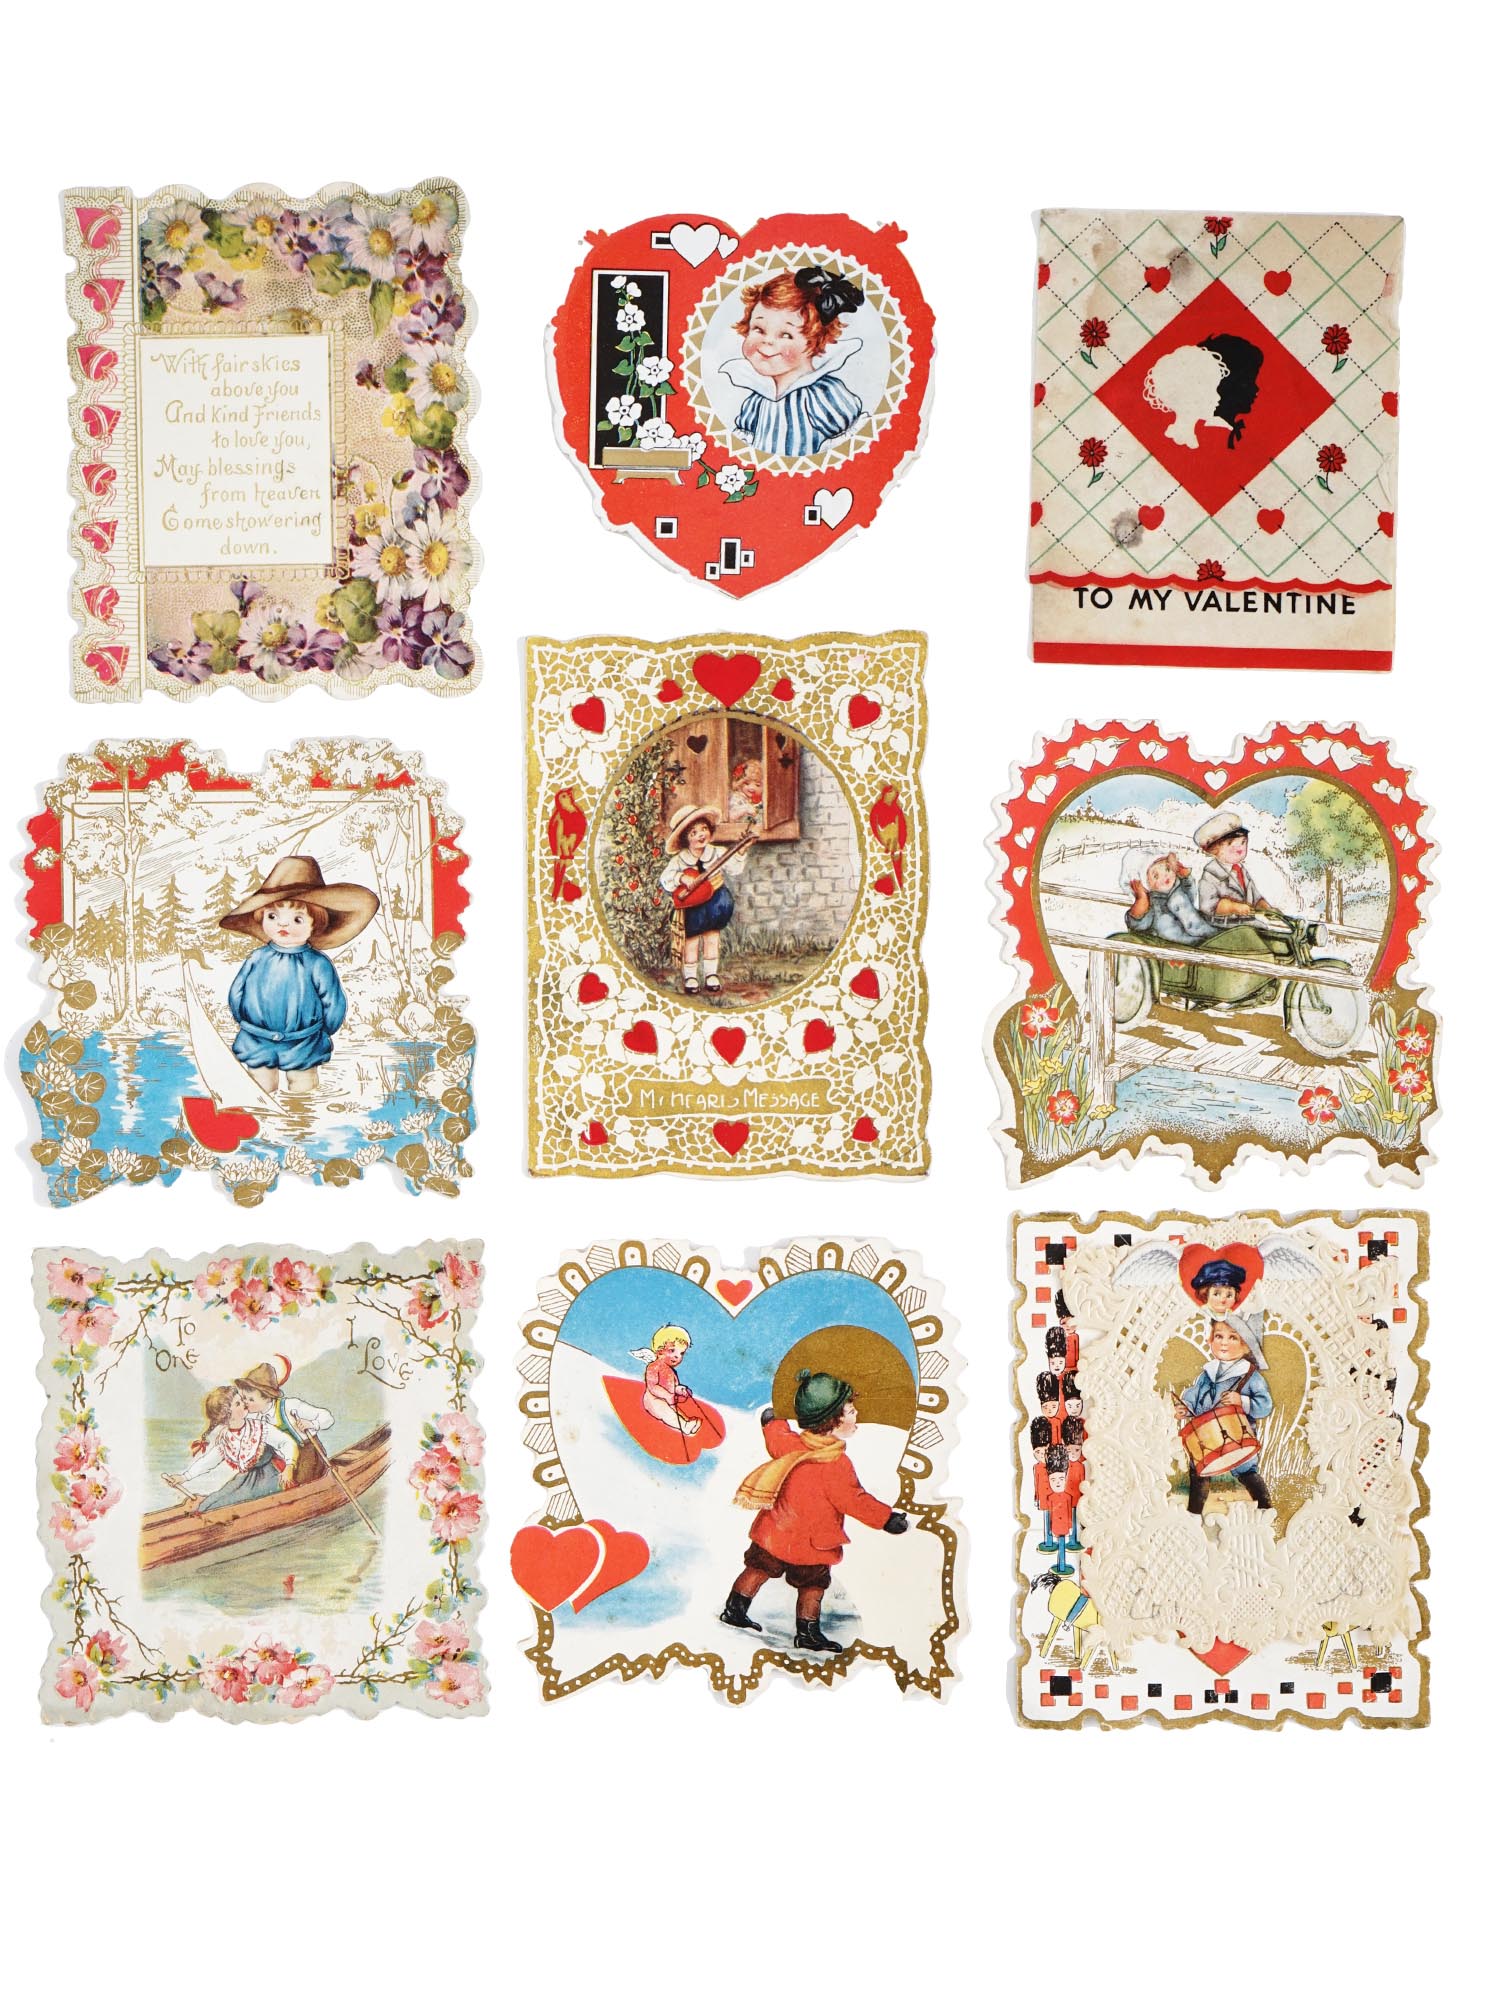 ANTIQUE VALENTINES DAY CARDS COLLECTION IN ALBUM PIC-3